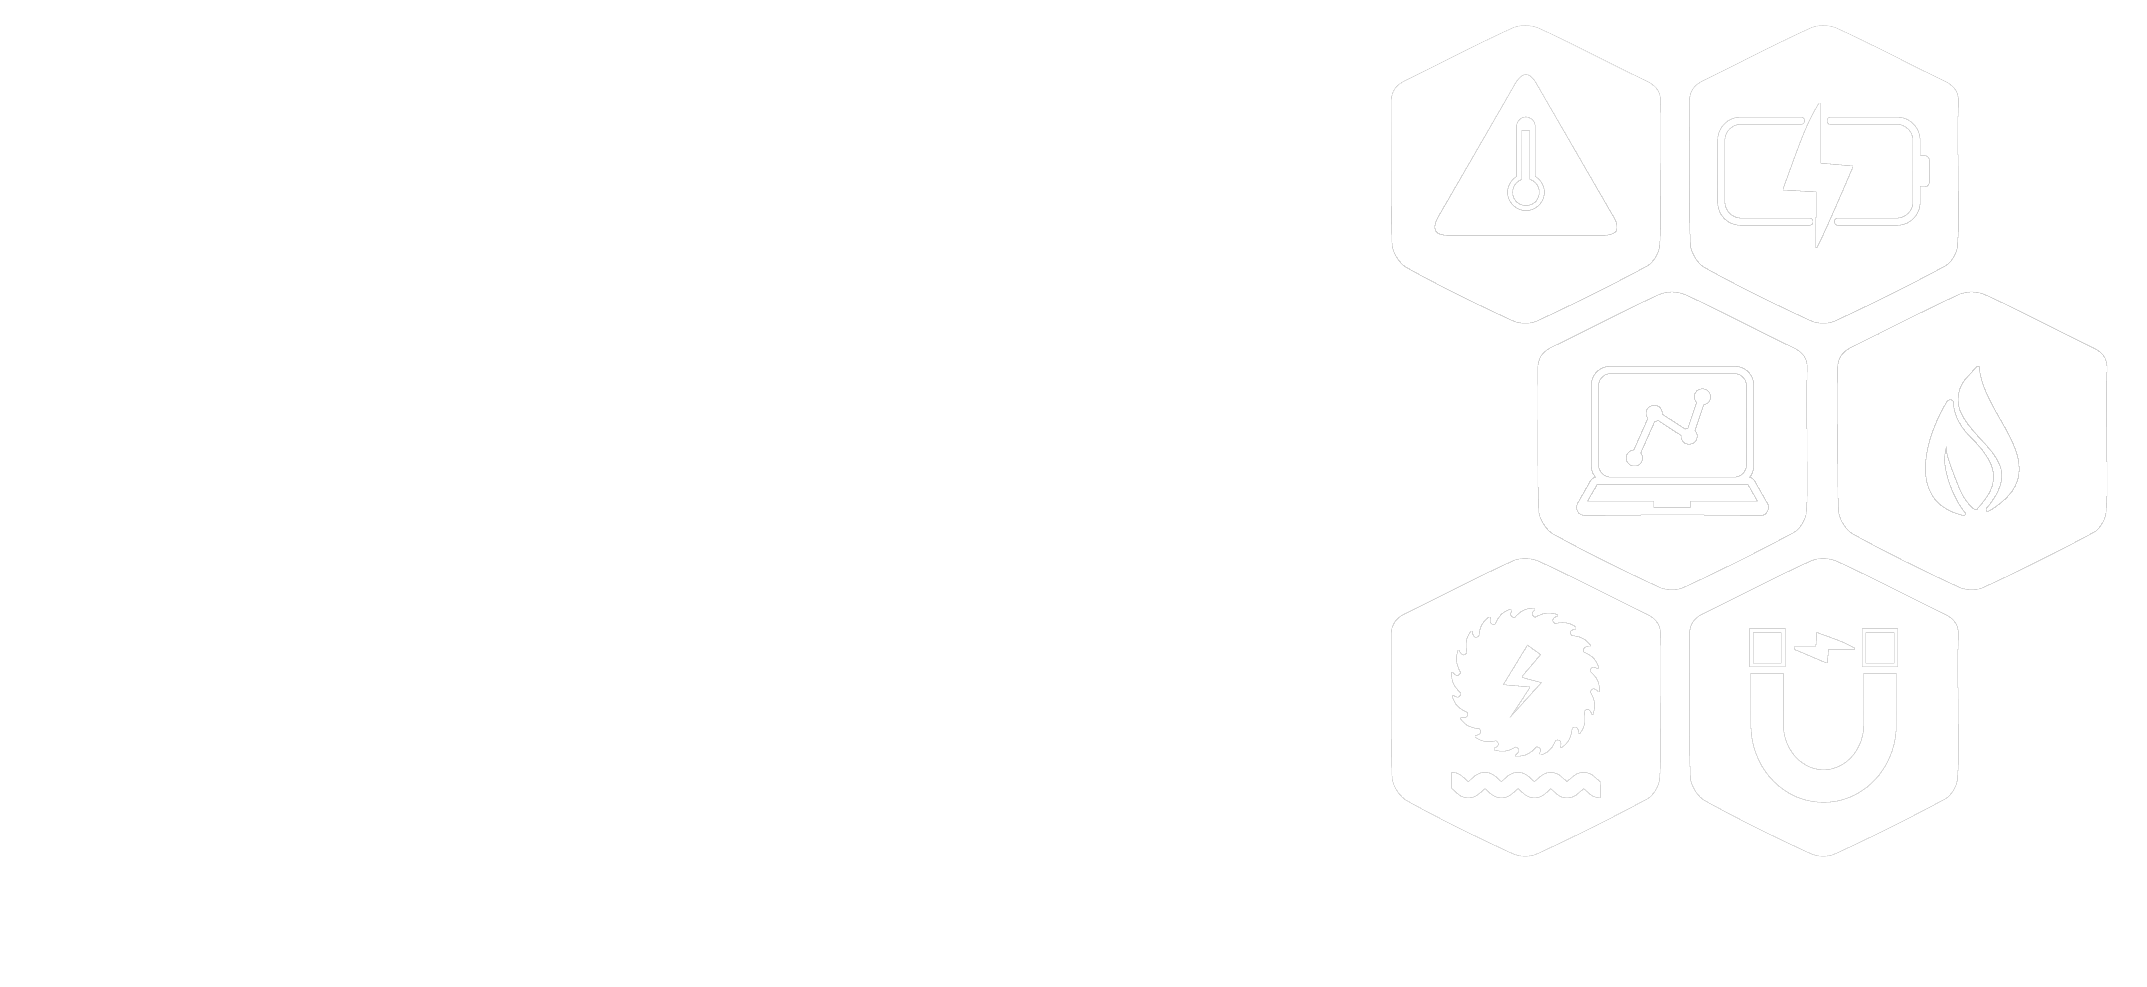 Storage Research Infrastructure Eco-System